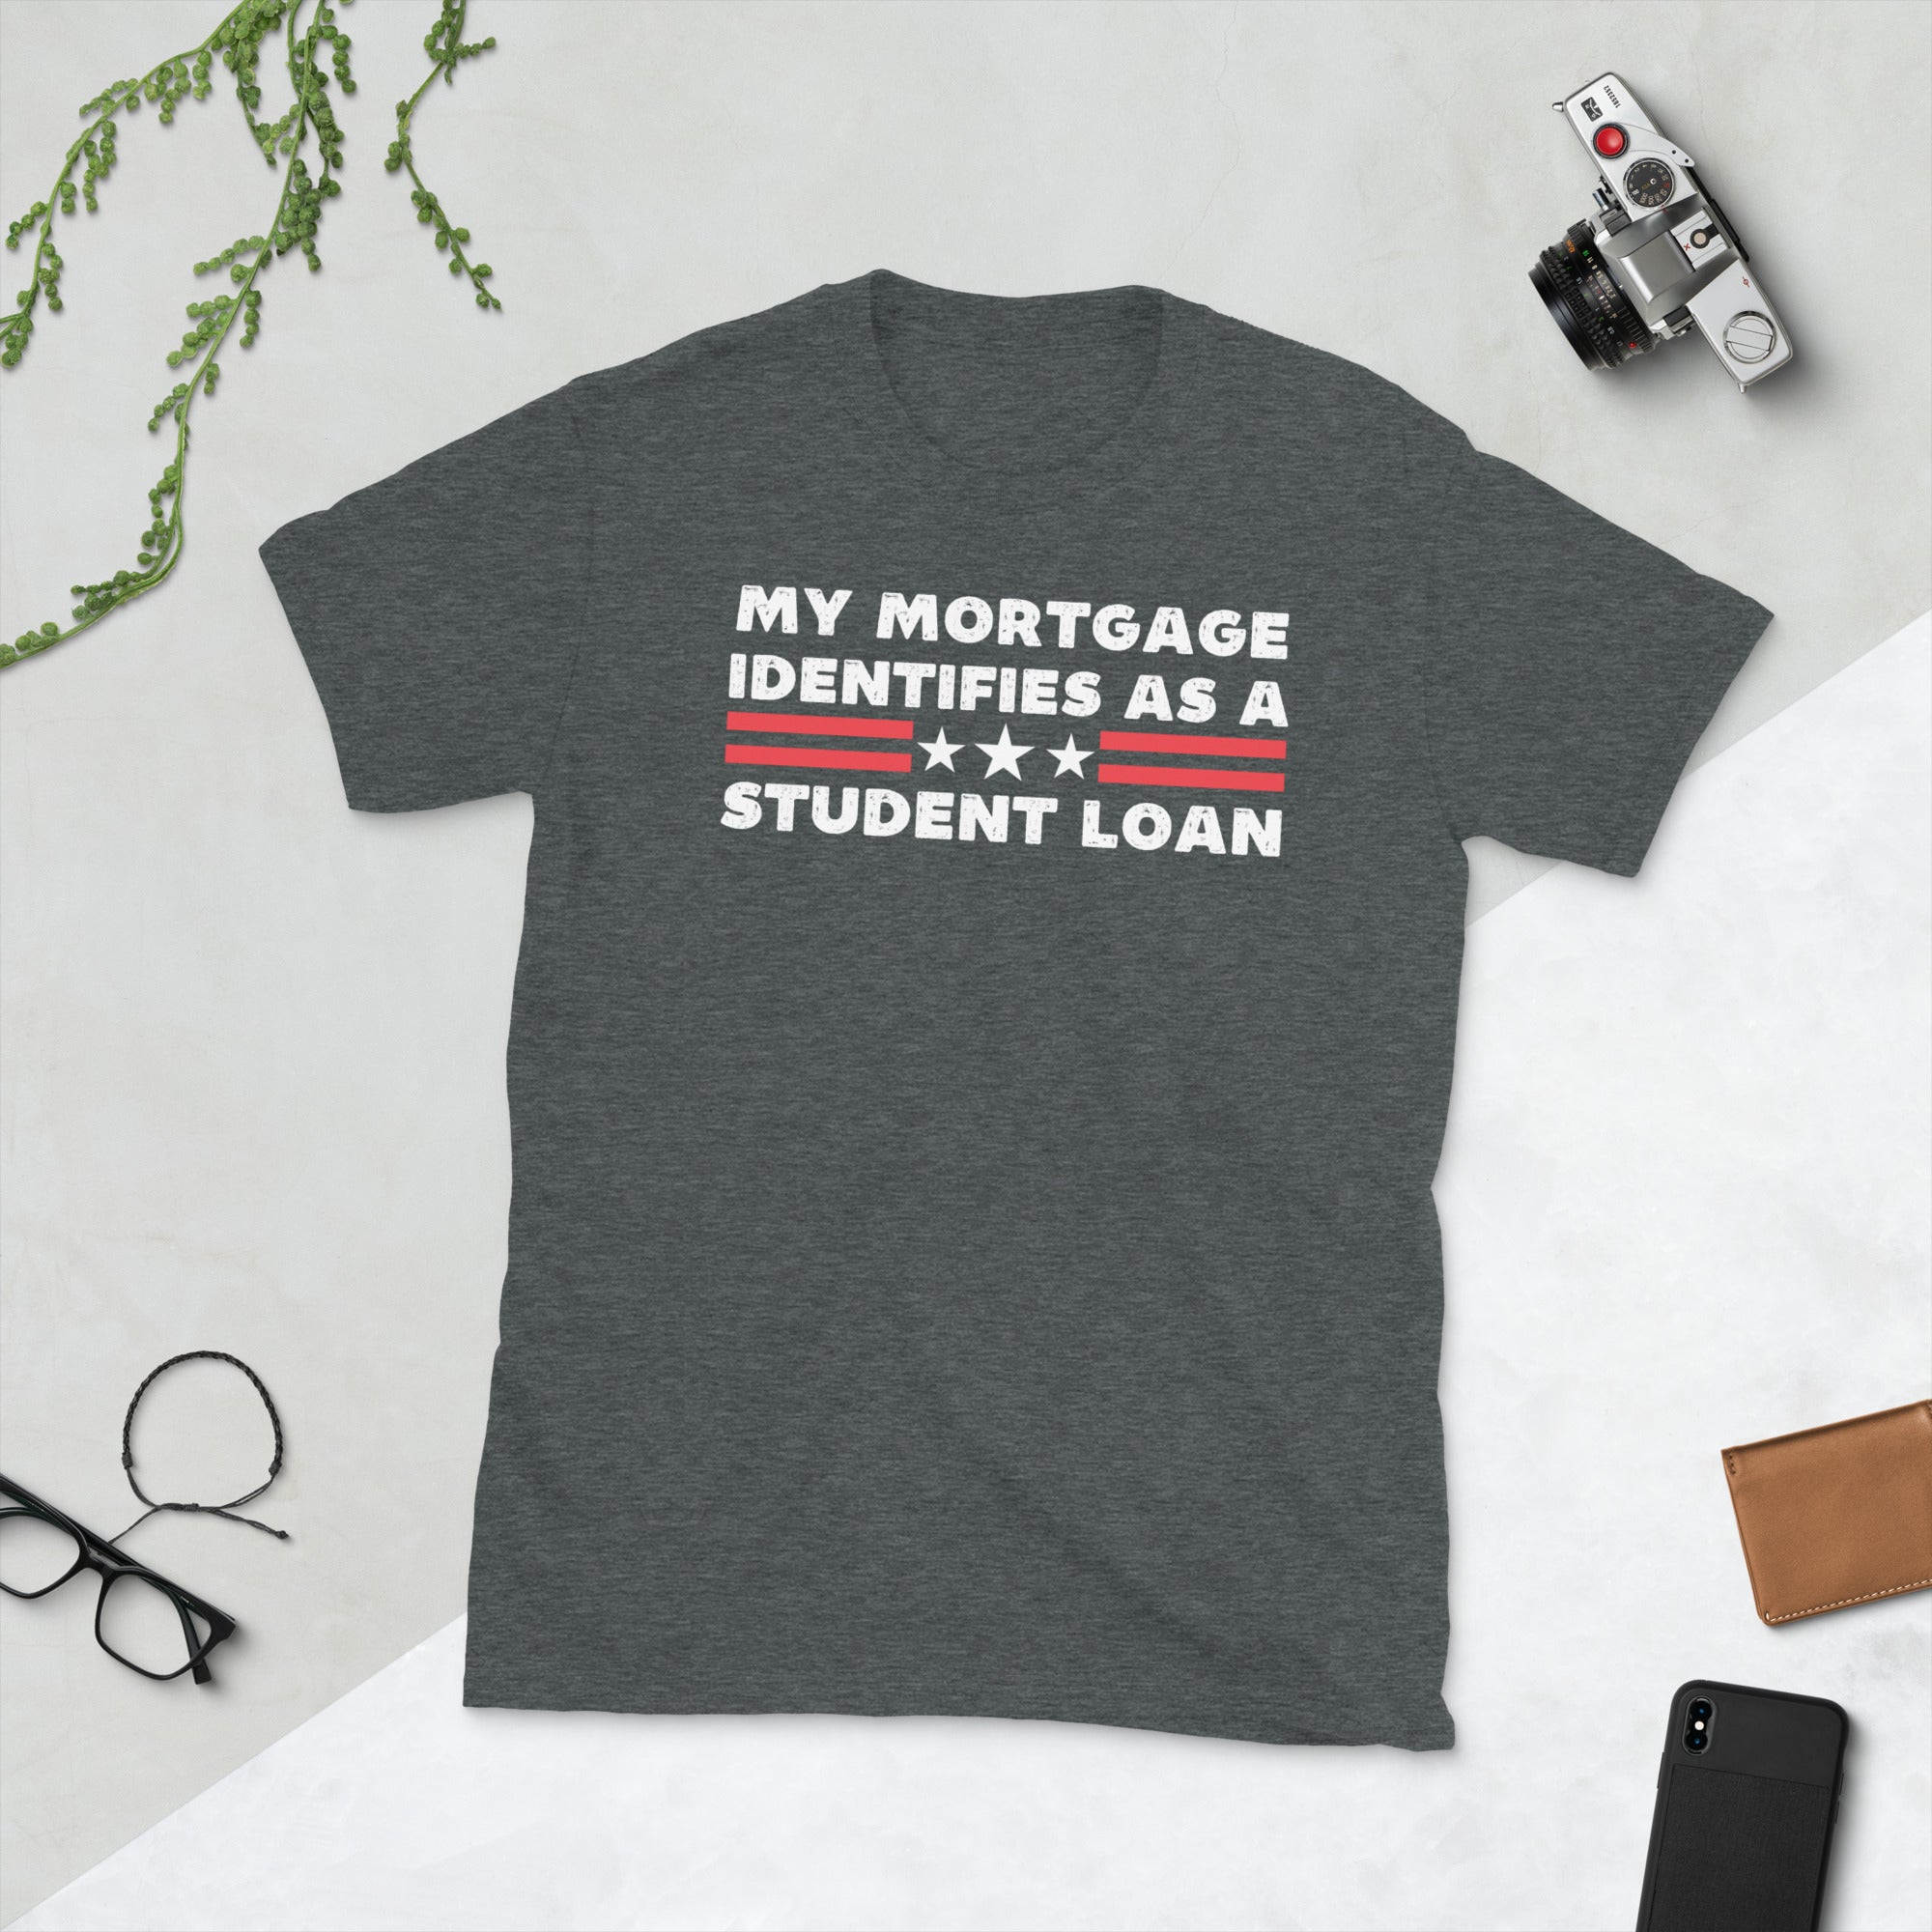 My Mortgage Identifies As A Student Loan, Funny Republican Shirt, Student Loan Forgiveness, FJB Shirt, American Patriot, College Students - Madeinsea©